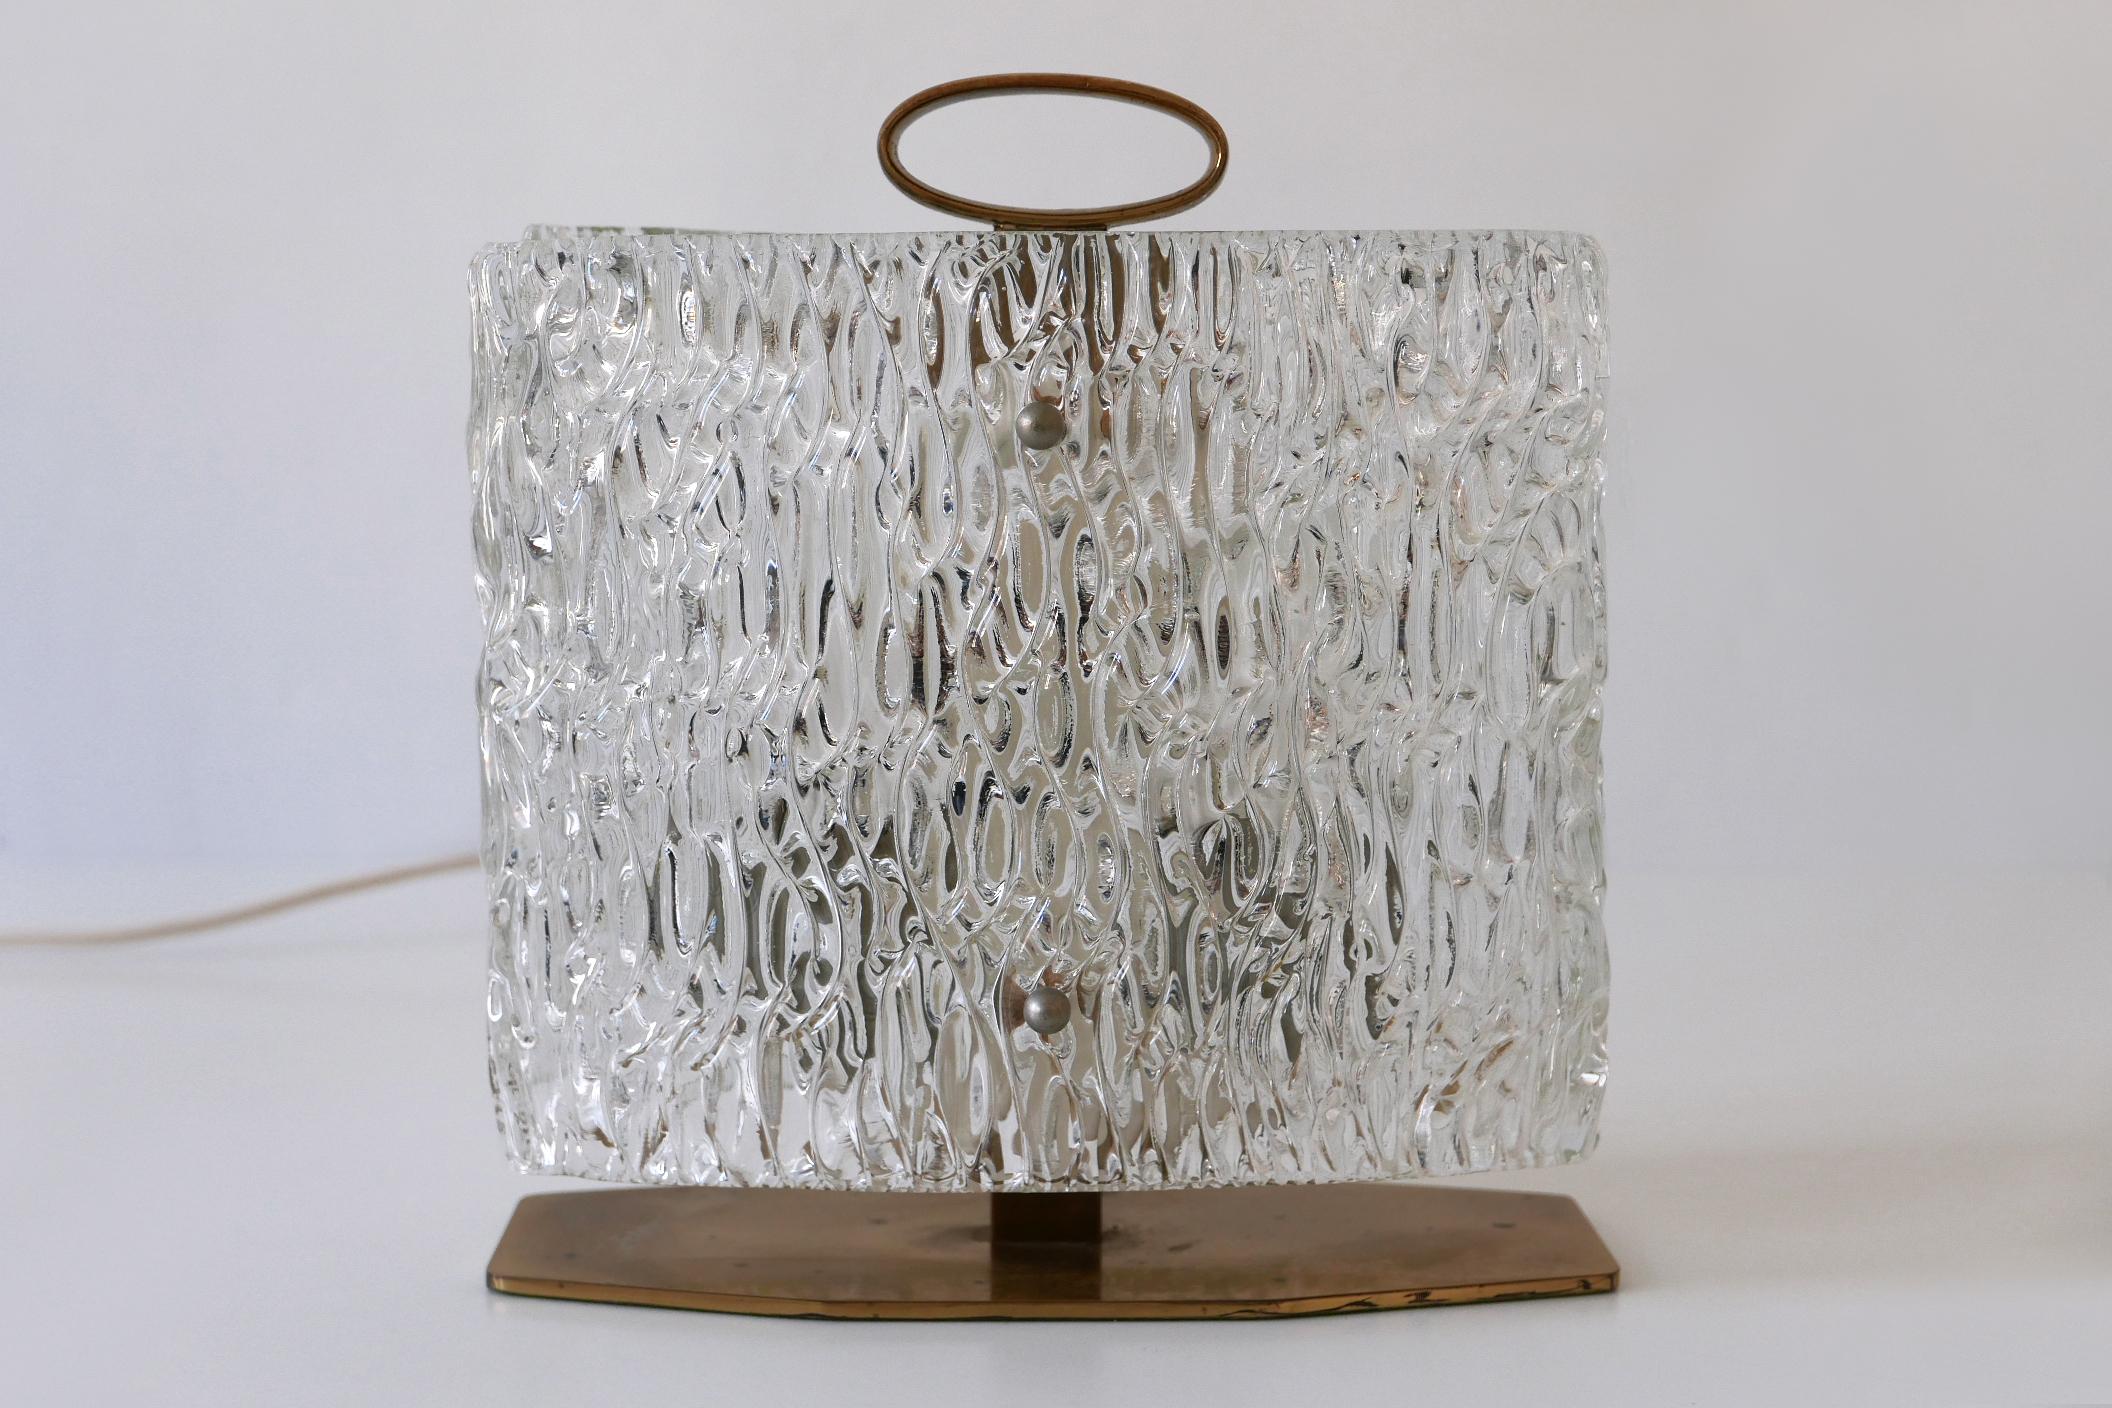 Exceptional Mid-Century Modern Table Lamp with Ice Glass Shade, 1950s, Italy For Sale 3